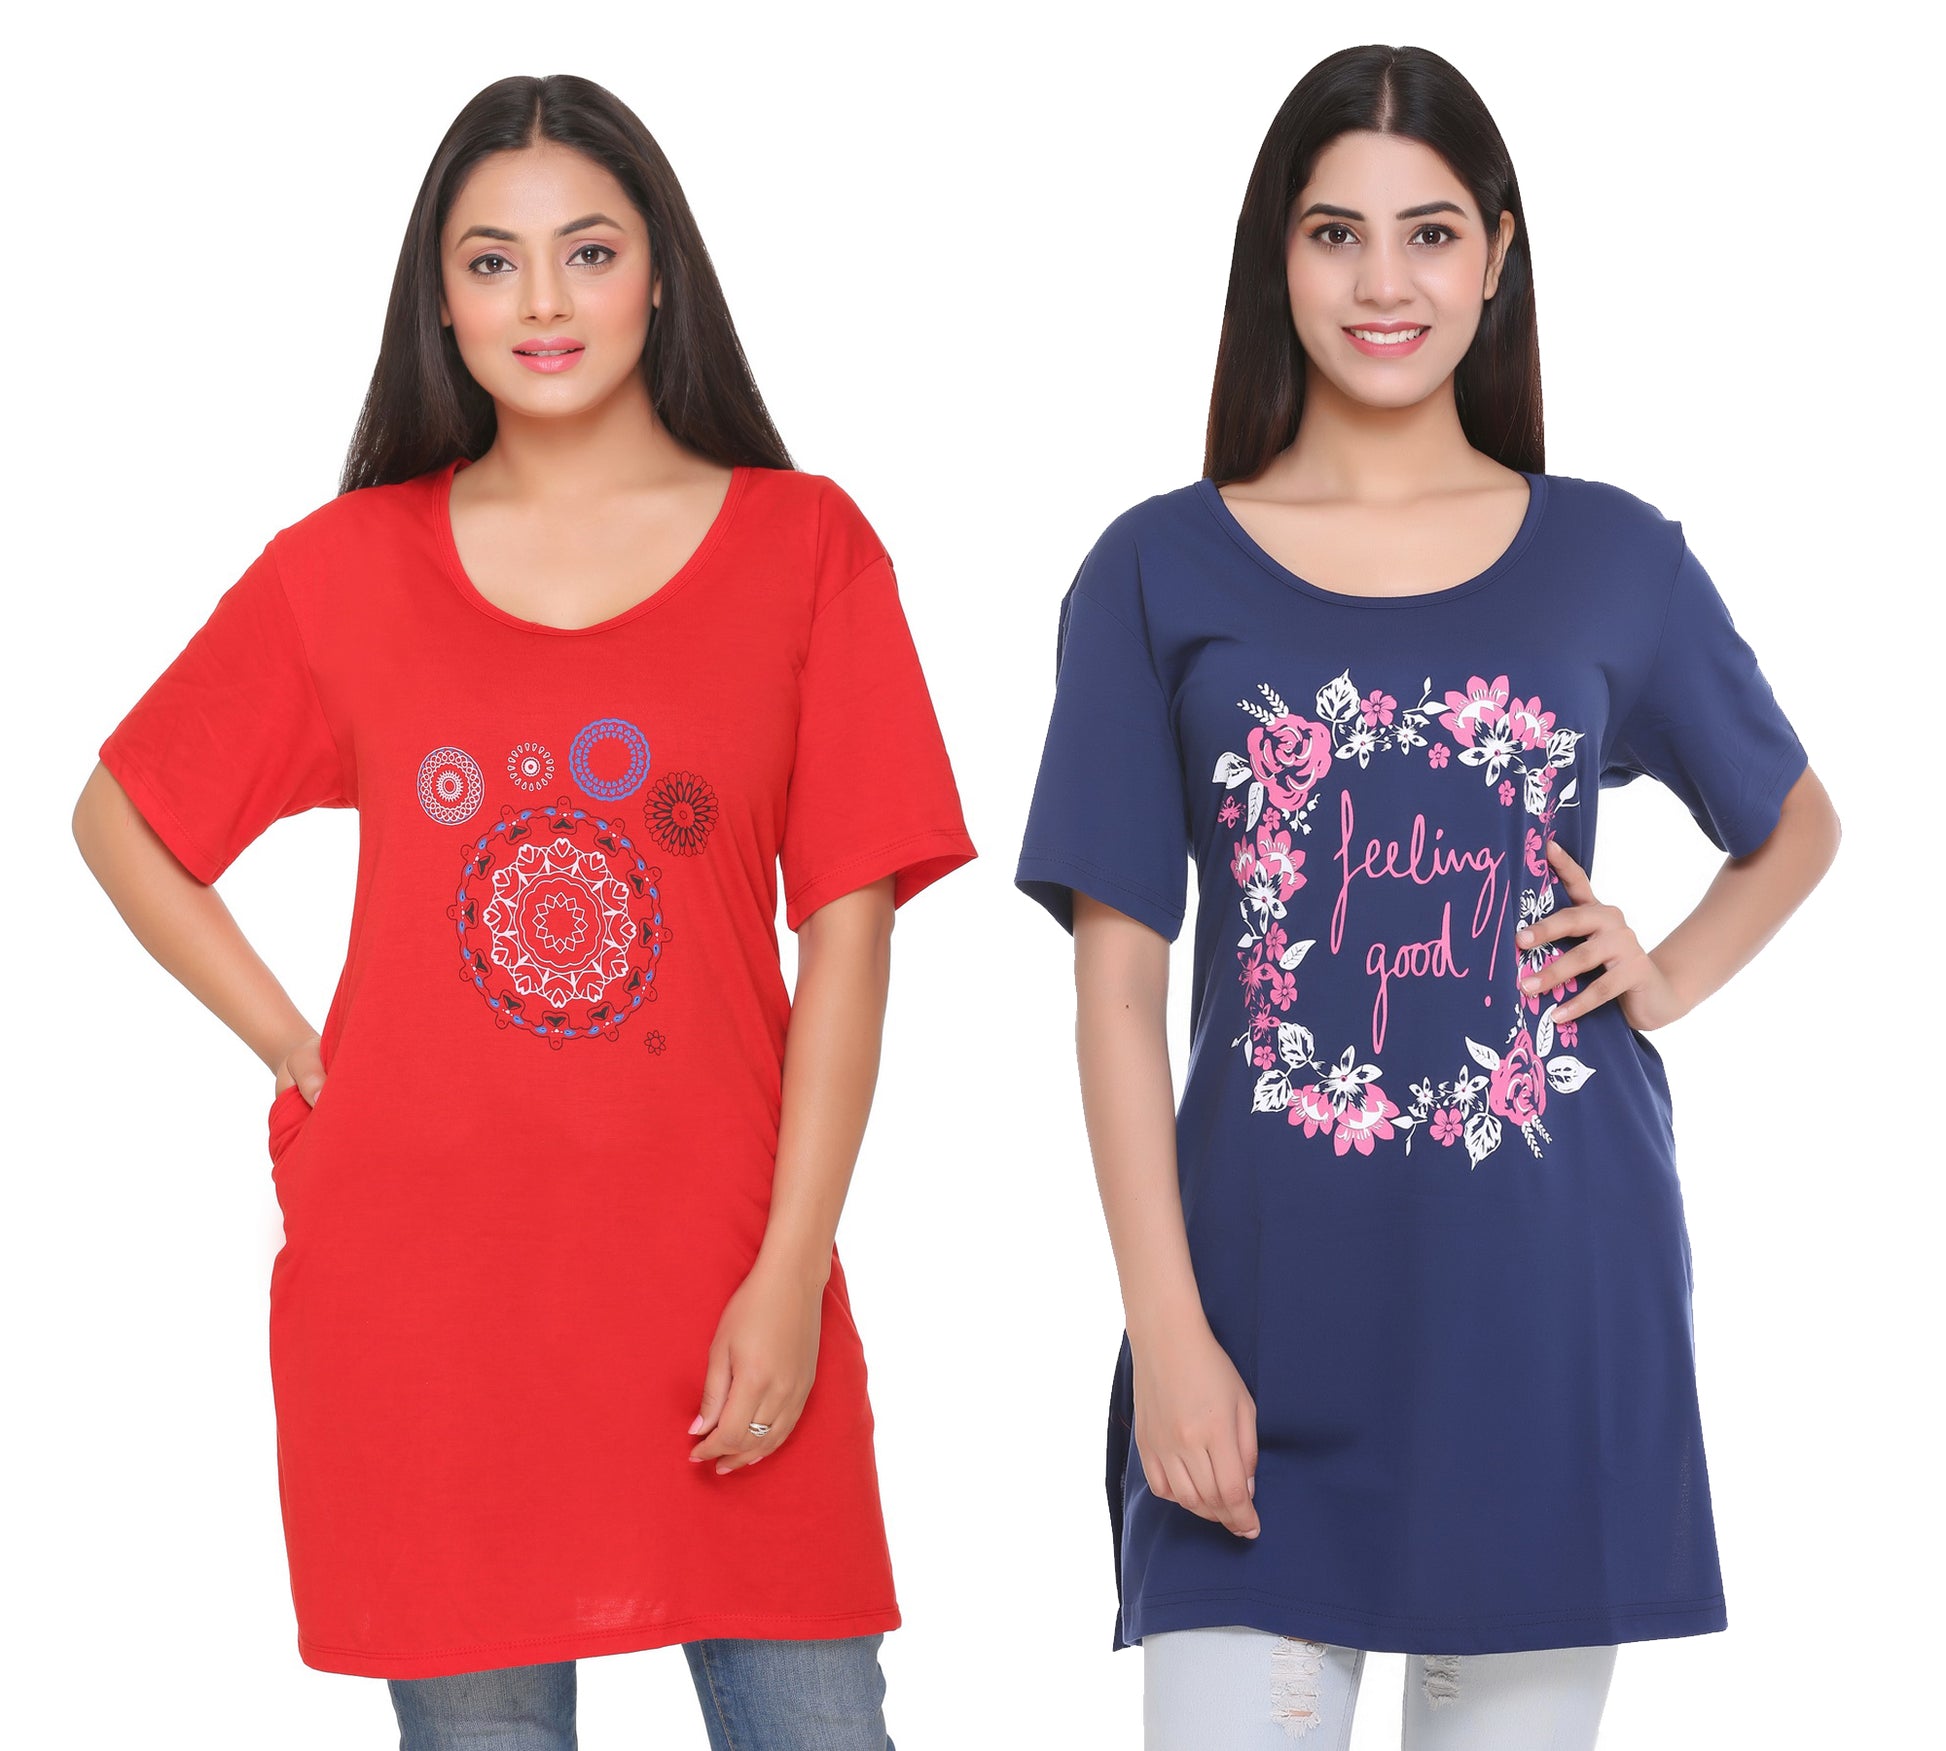 Plus Size Long T-shirts For Women - Half Sleeve - Pack of 2 (Navy Blue & Red)